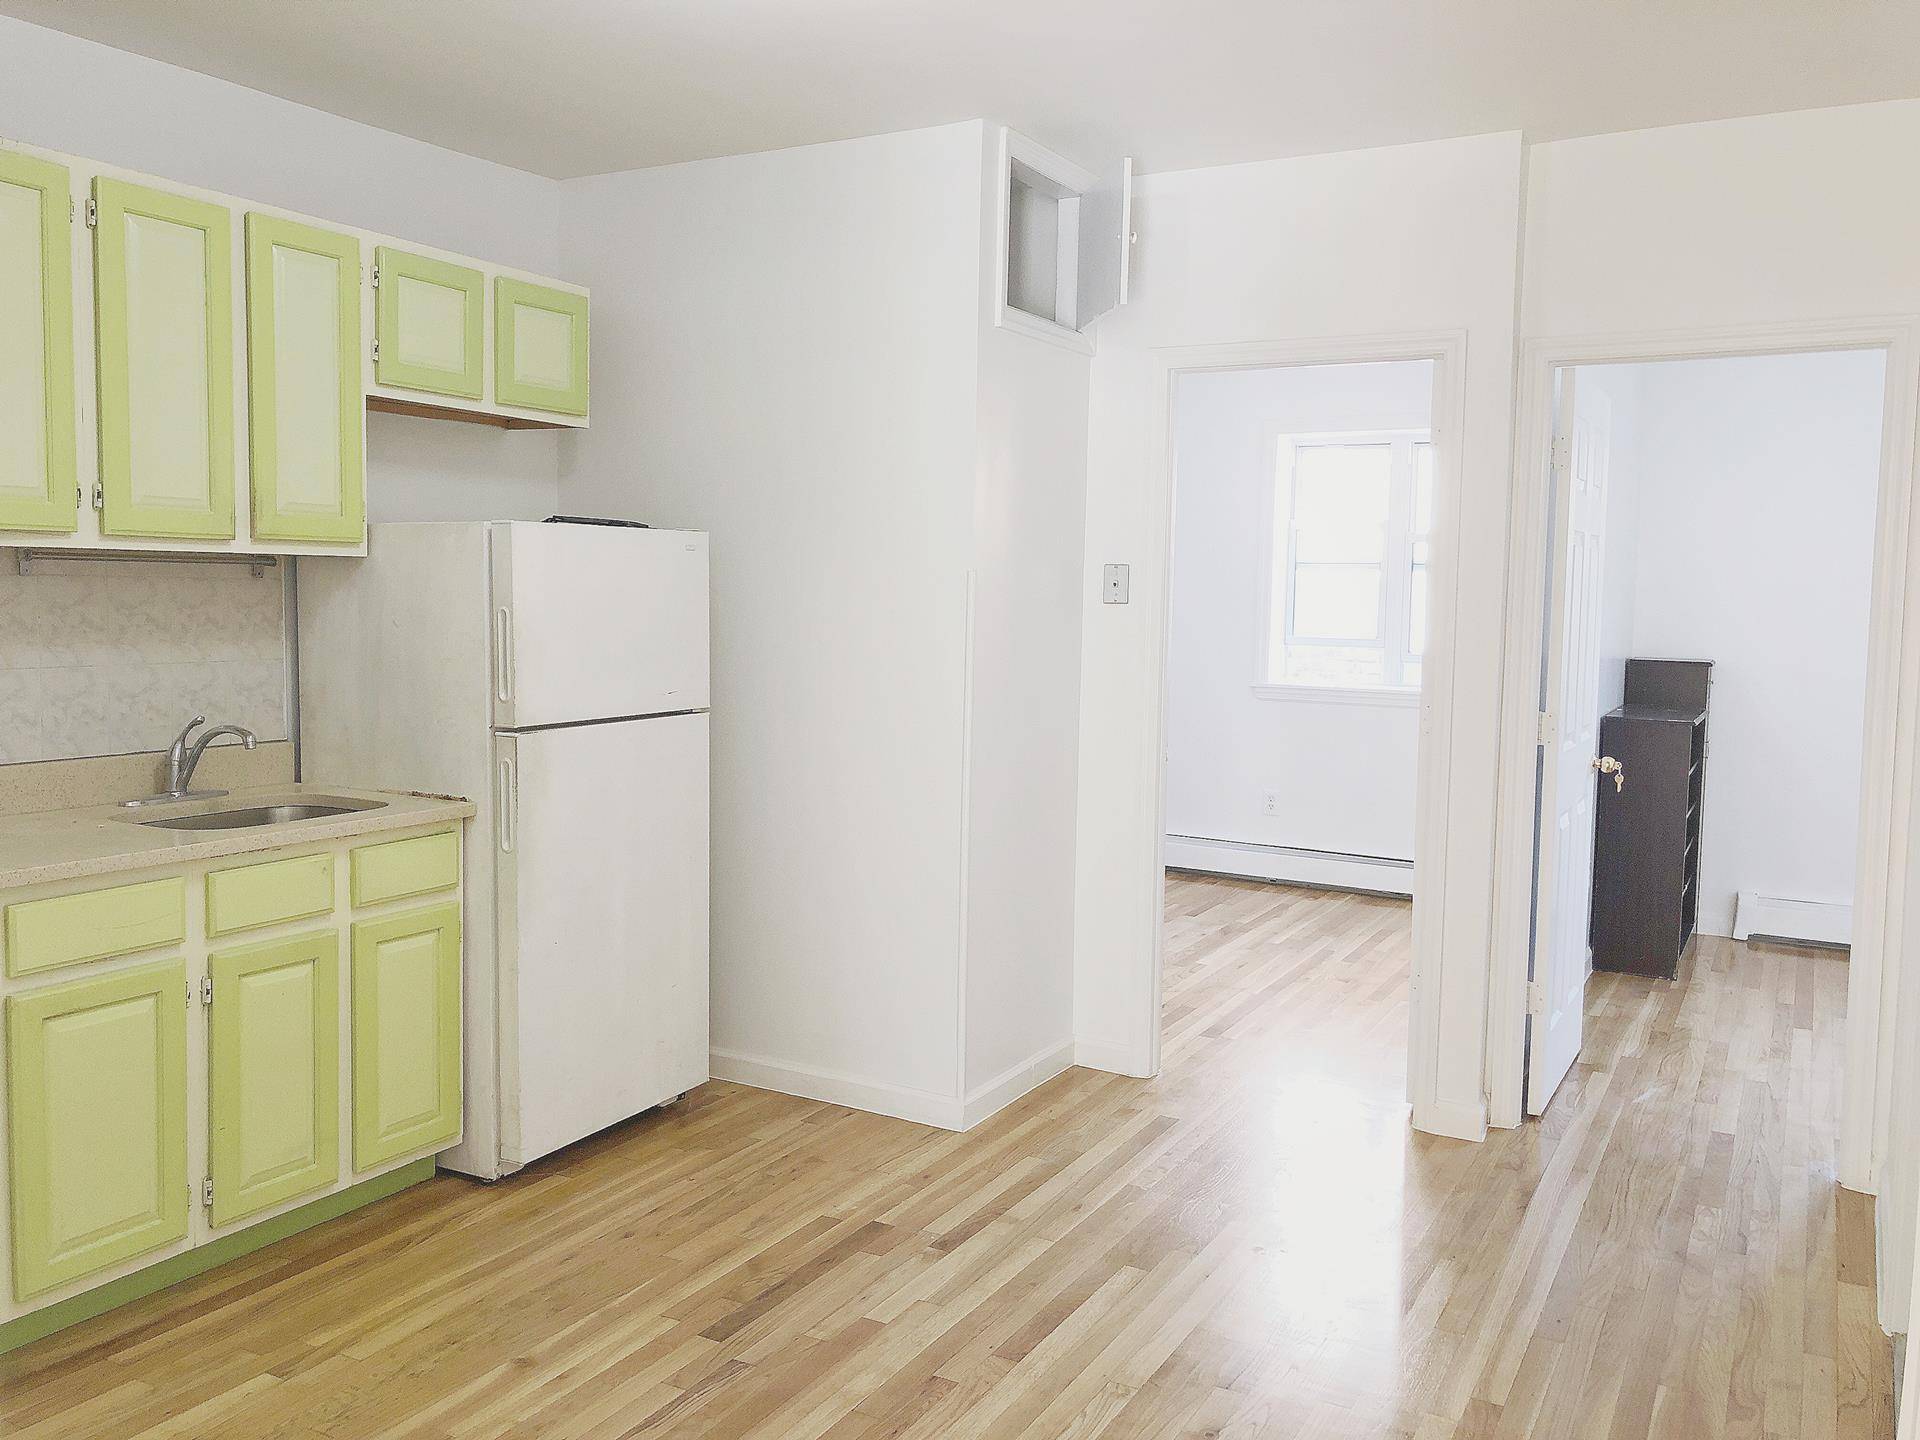 It's all about location. A bright, floor through 3 Beds 2 Baths apartment in a prime location in Elmhurst is available for July 1st, 2020.